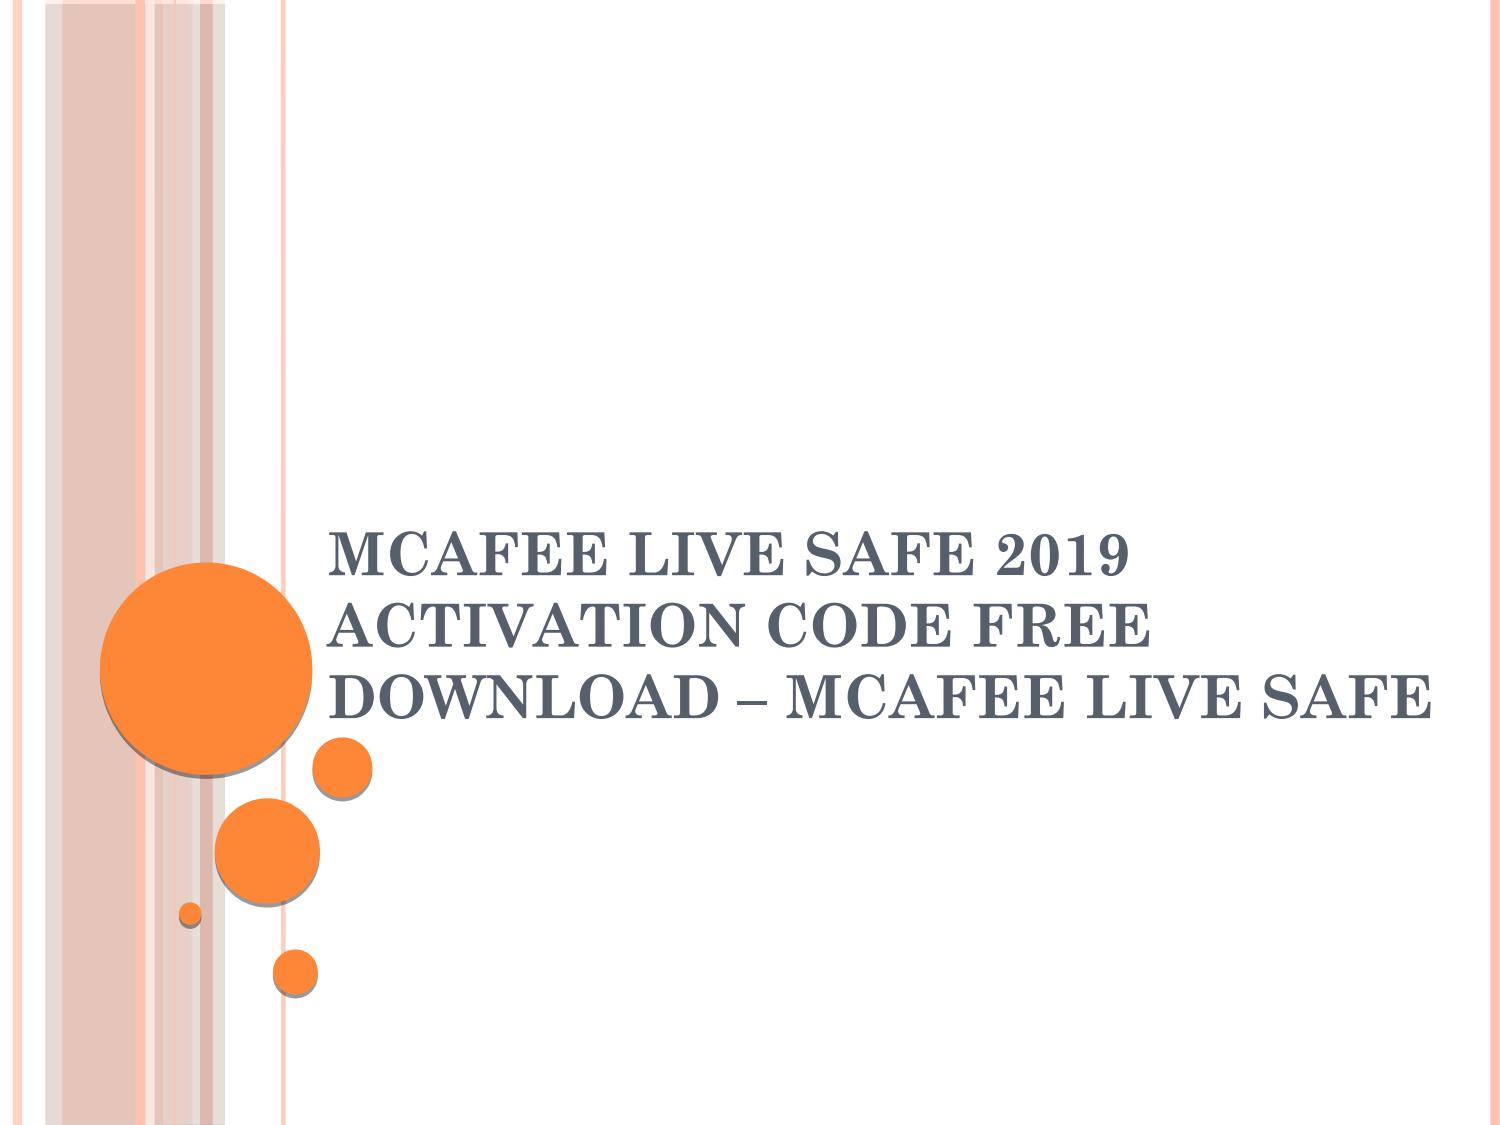 Mcafee Activation Code Free